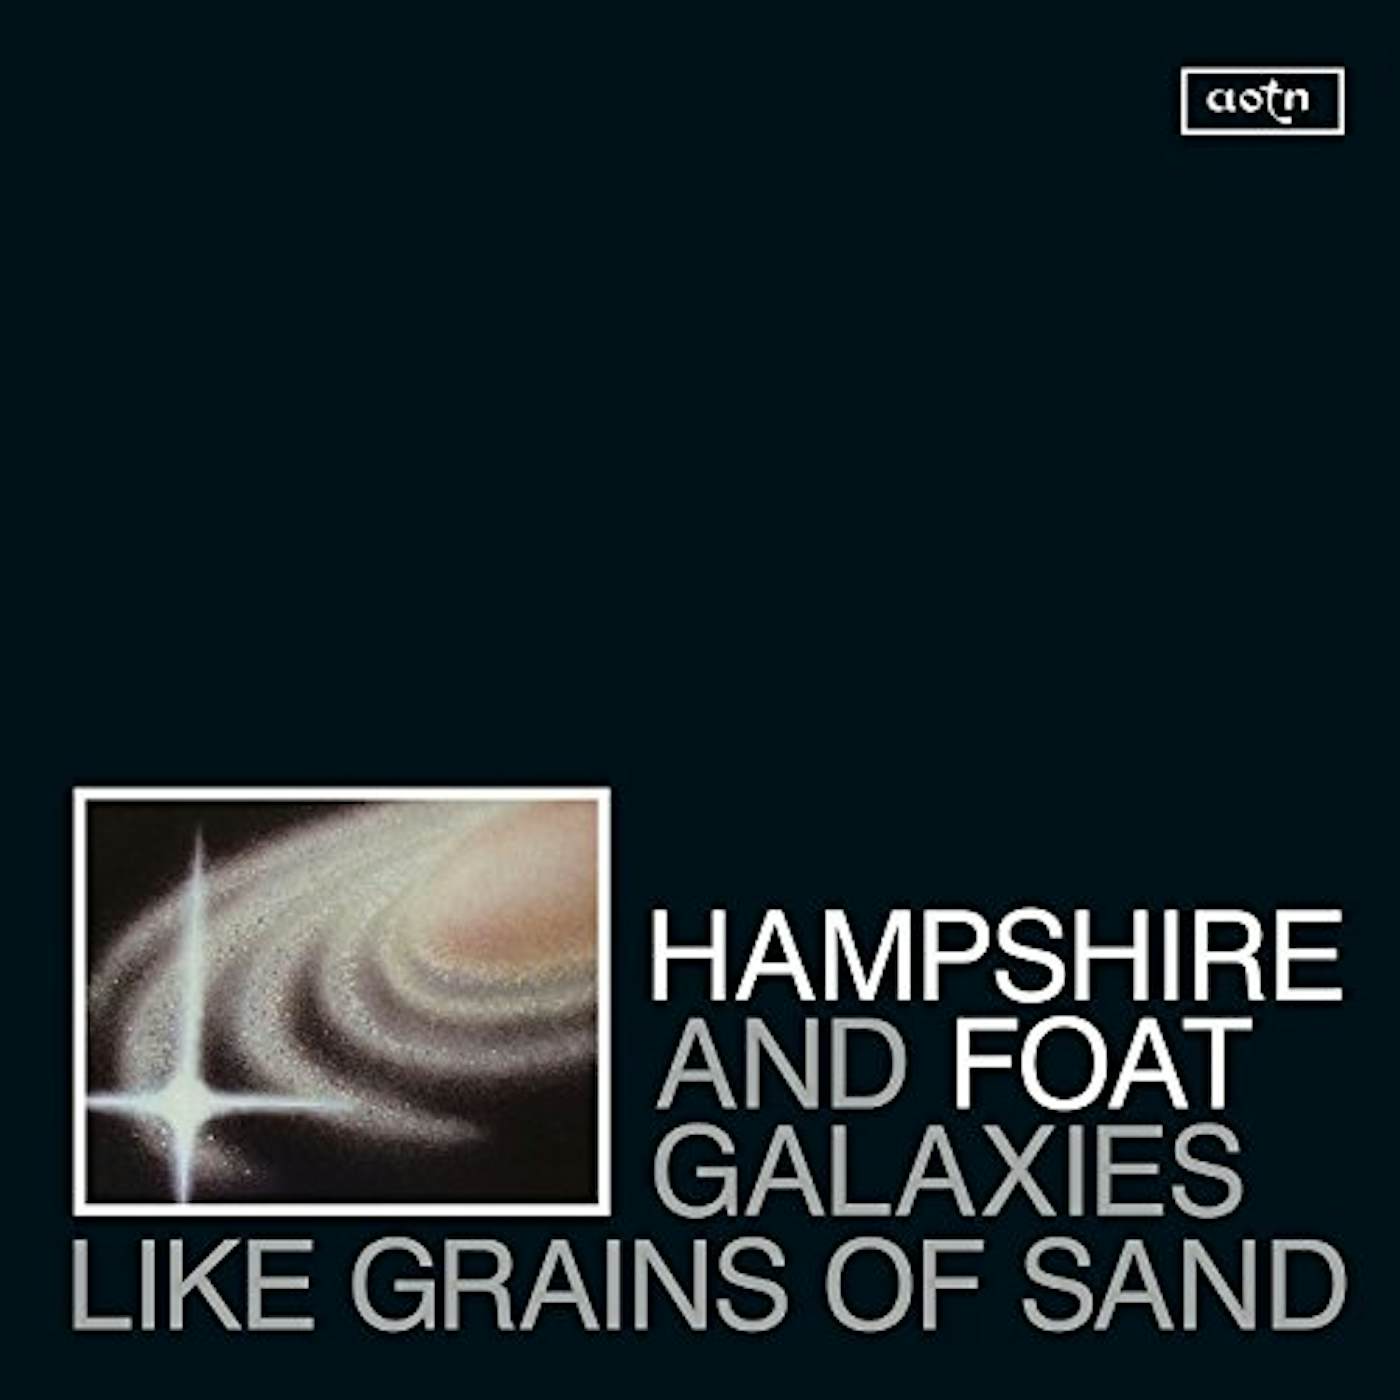 Hampshire & Foat Galaxies Like Grains of Sand Vinyl Record